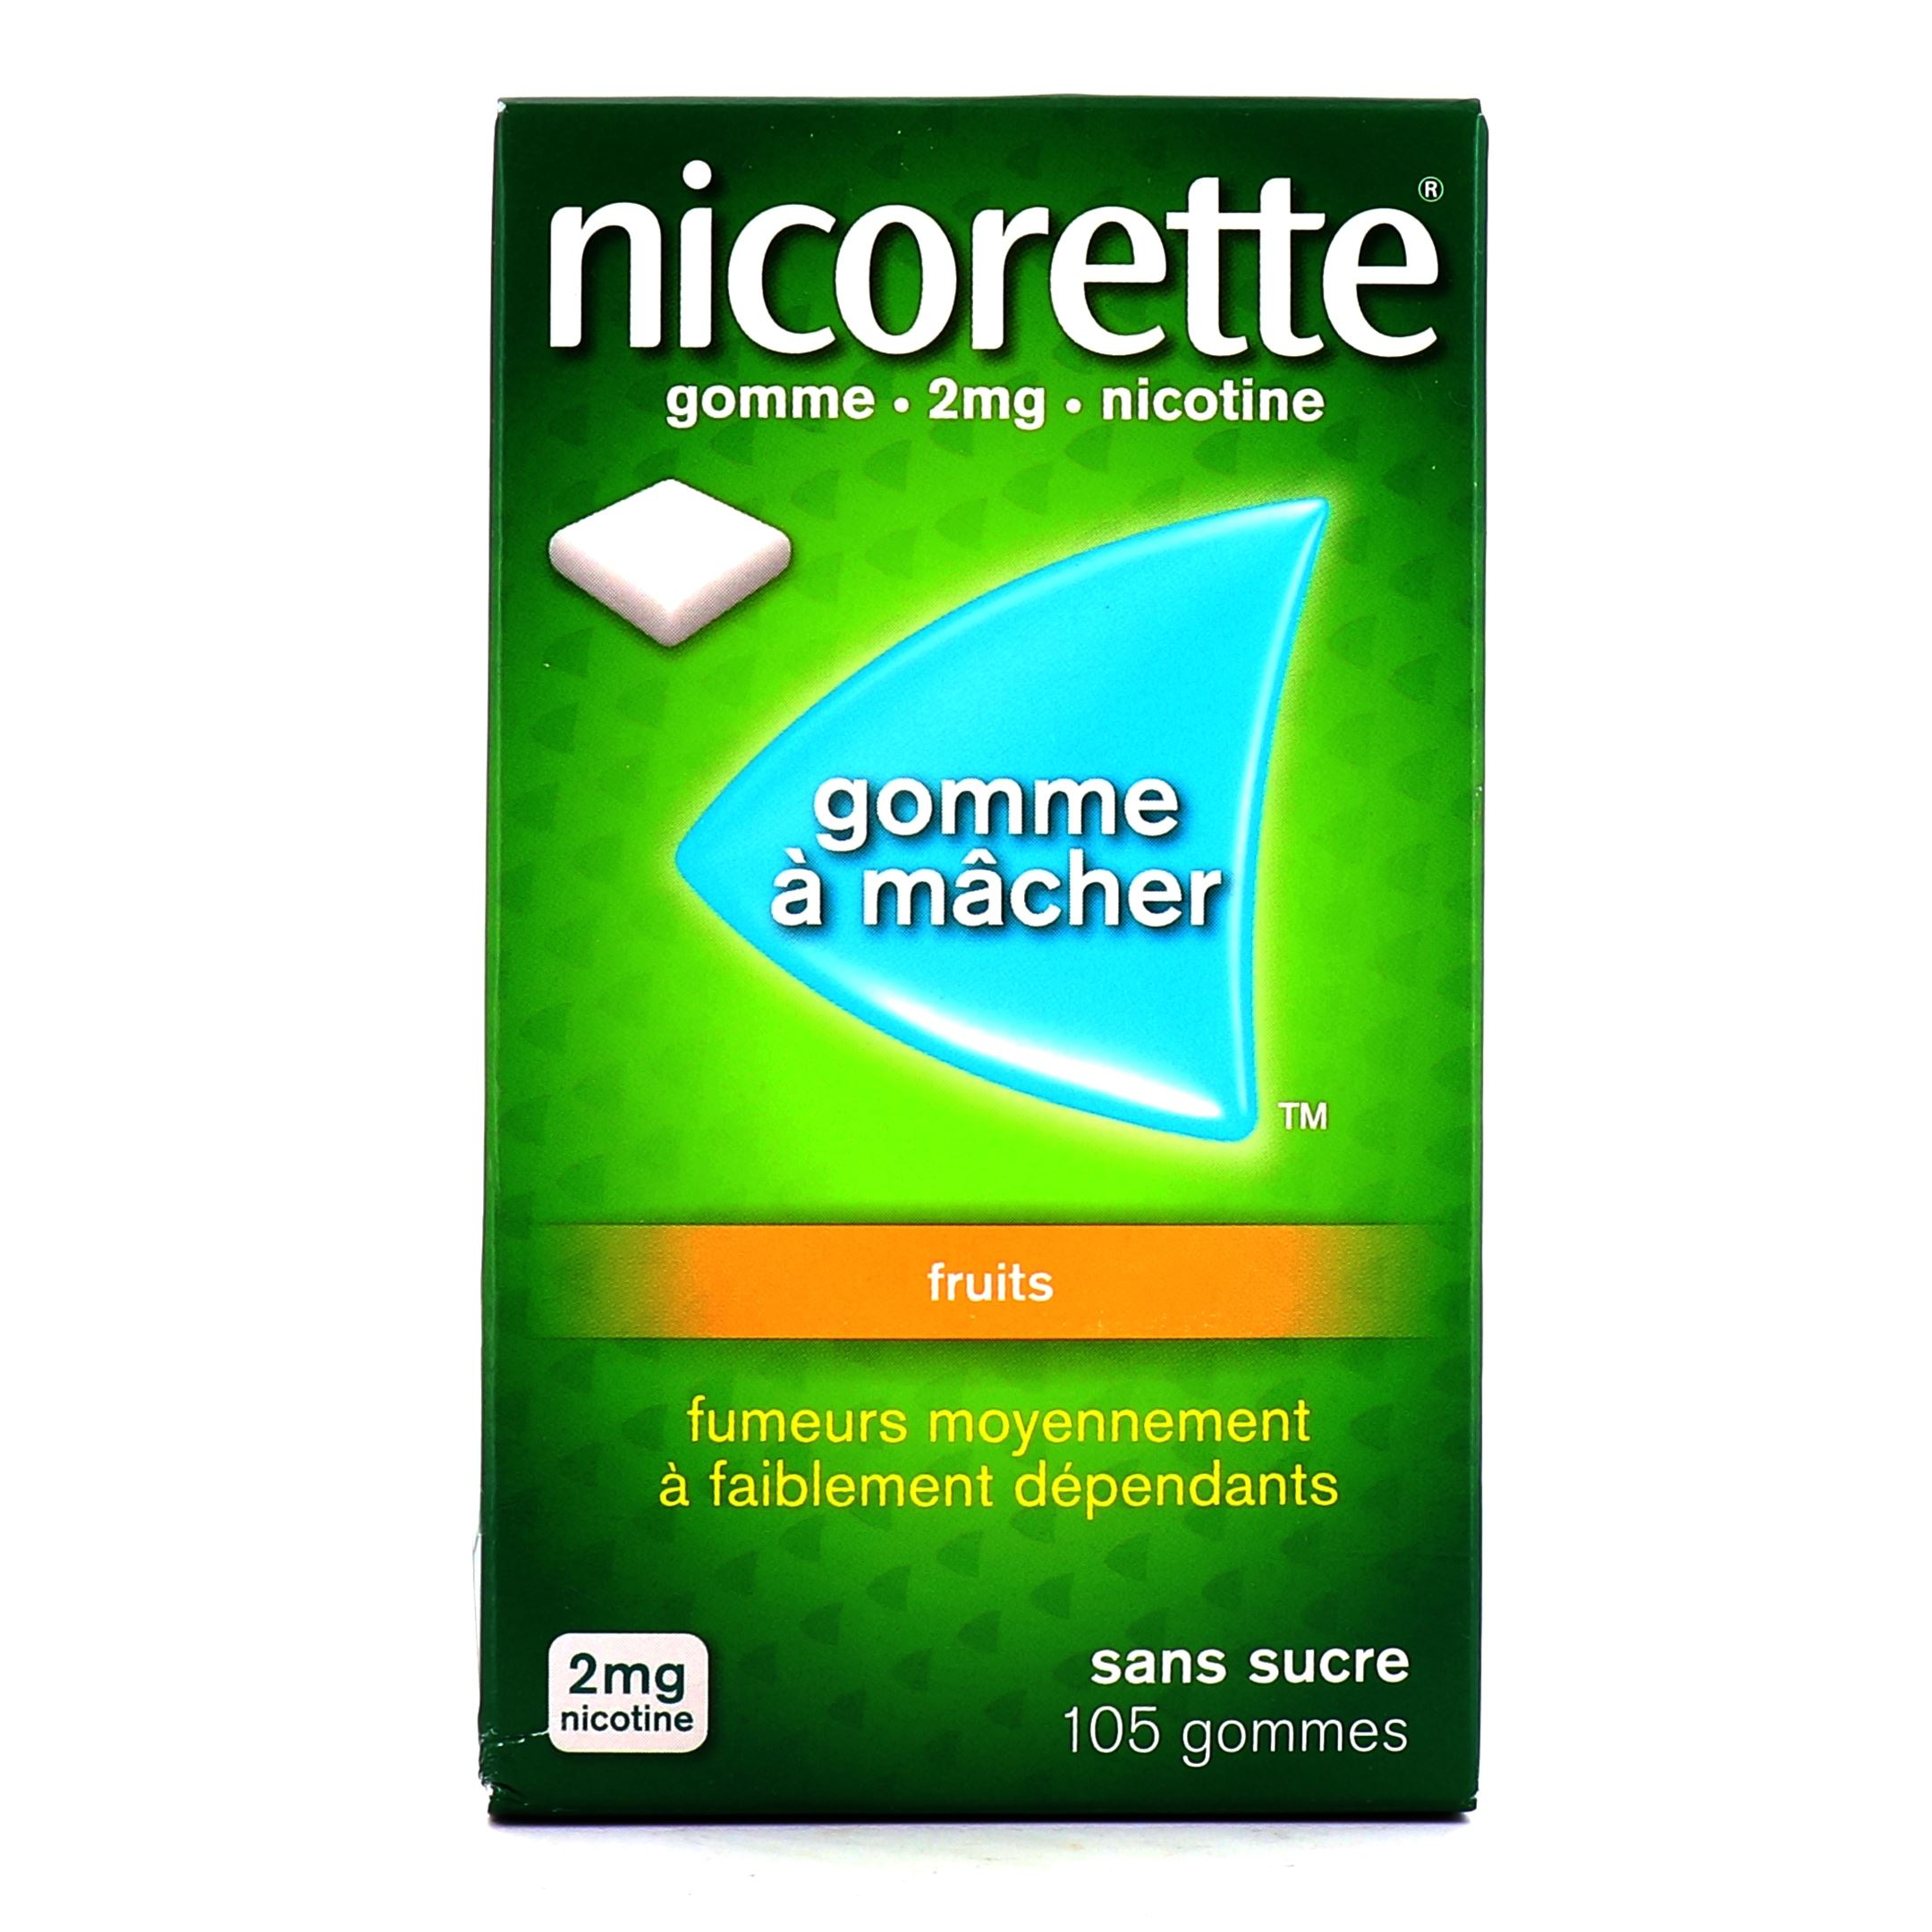 Nicorette 2mg Gomme Fruits S/s